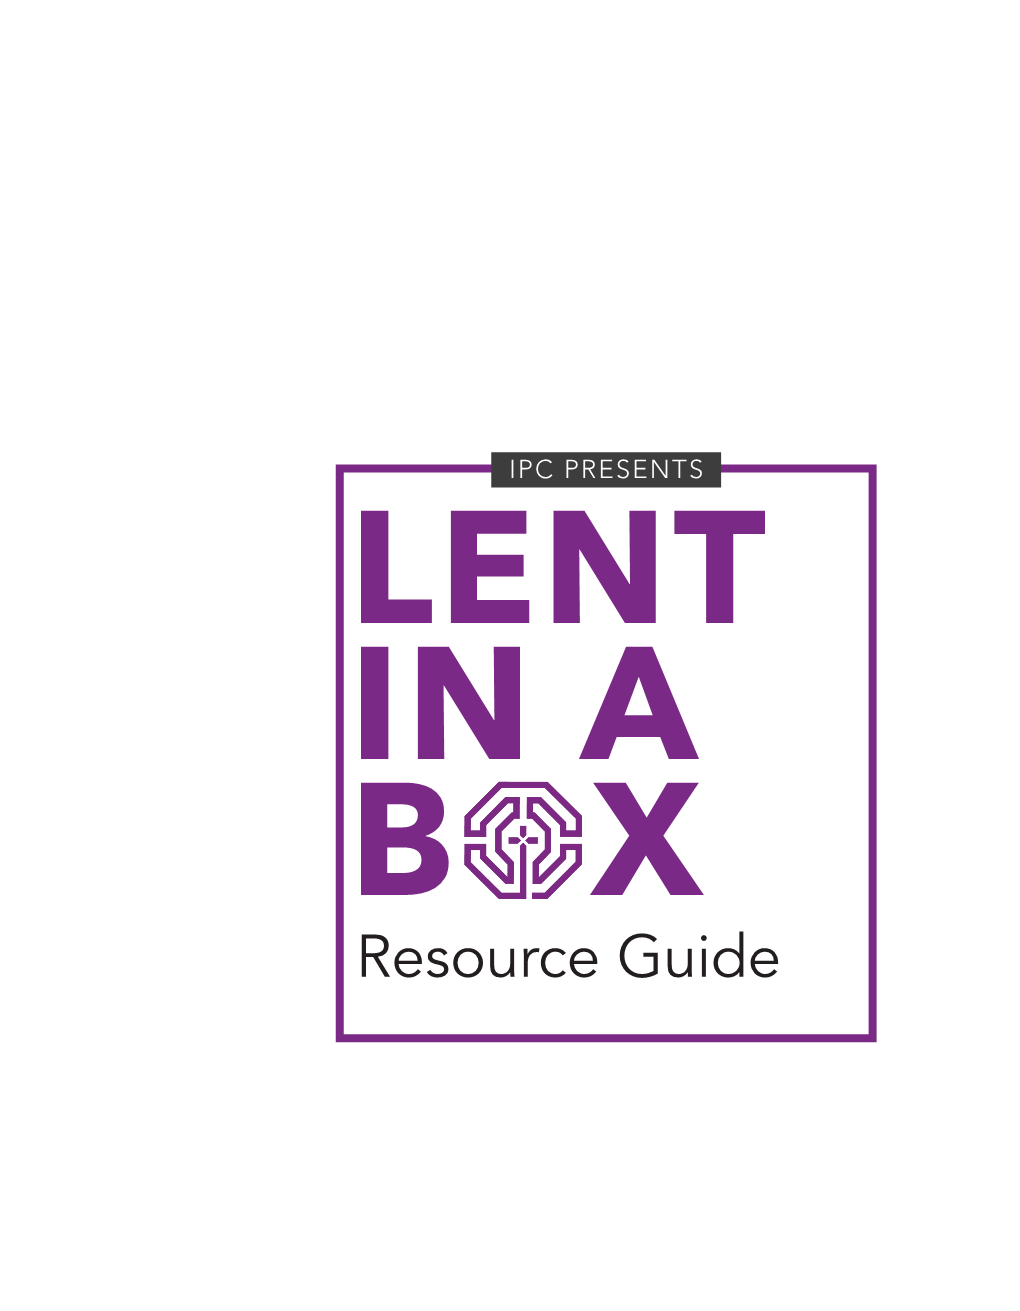 Resource Guide Along with Materials for Each Week of Lent, As Well As a Couple of Simple Activities You Can Do Throughout the 40 Days of Lent